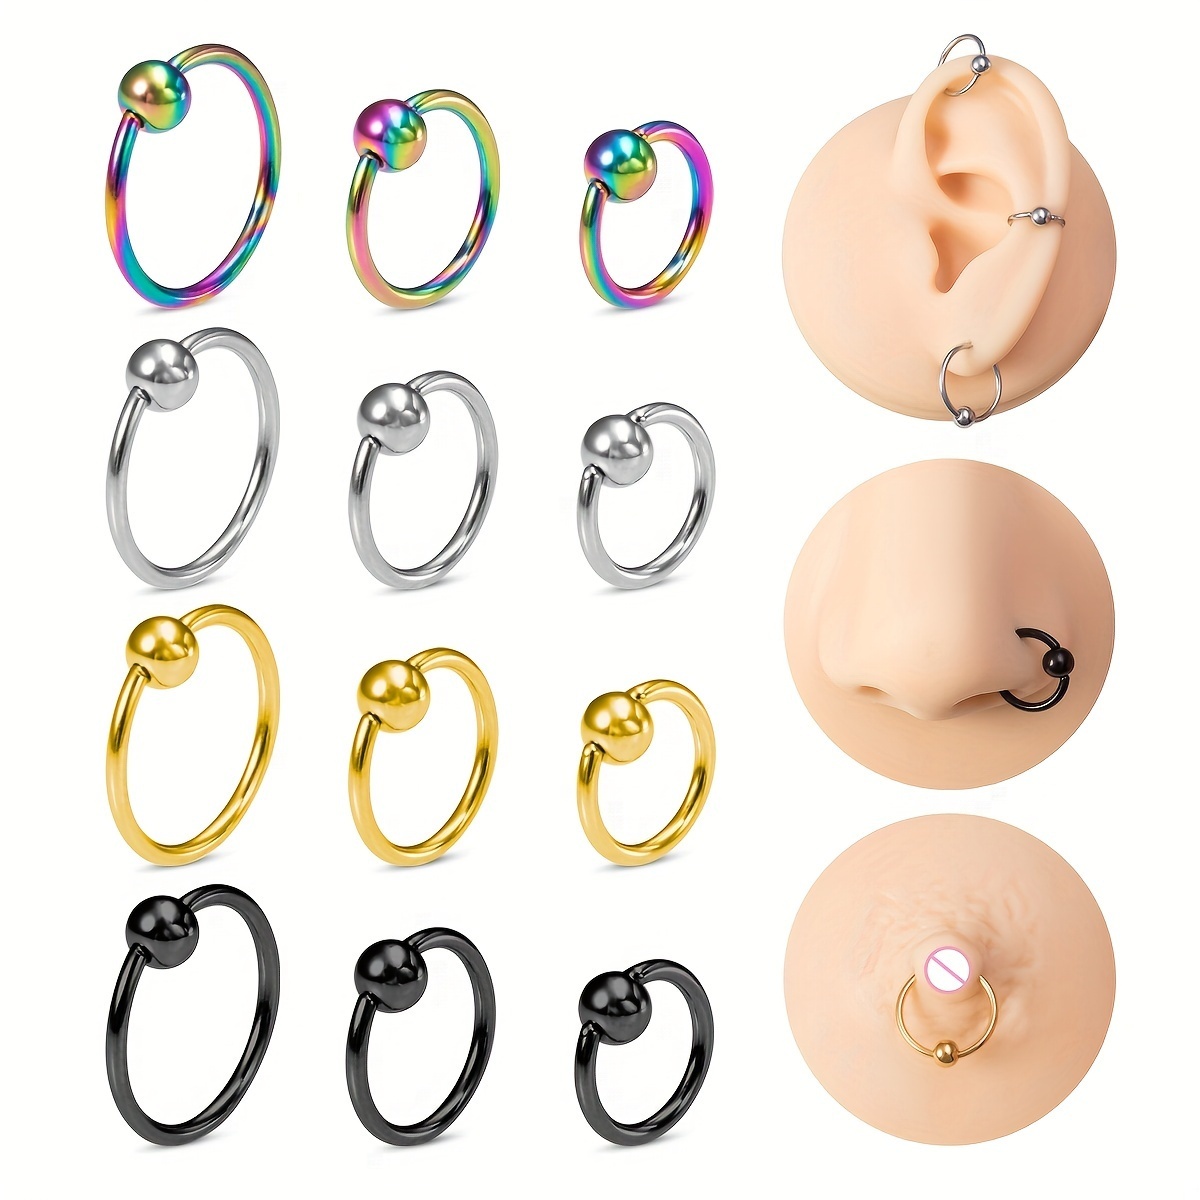 4pc/set Disposable Nose Ear Piercing Kit with 3 Nose Studs No Pain